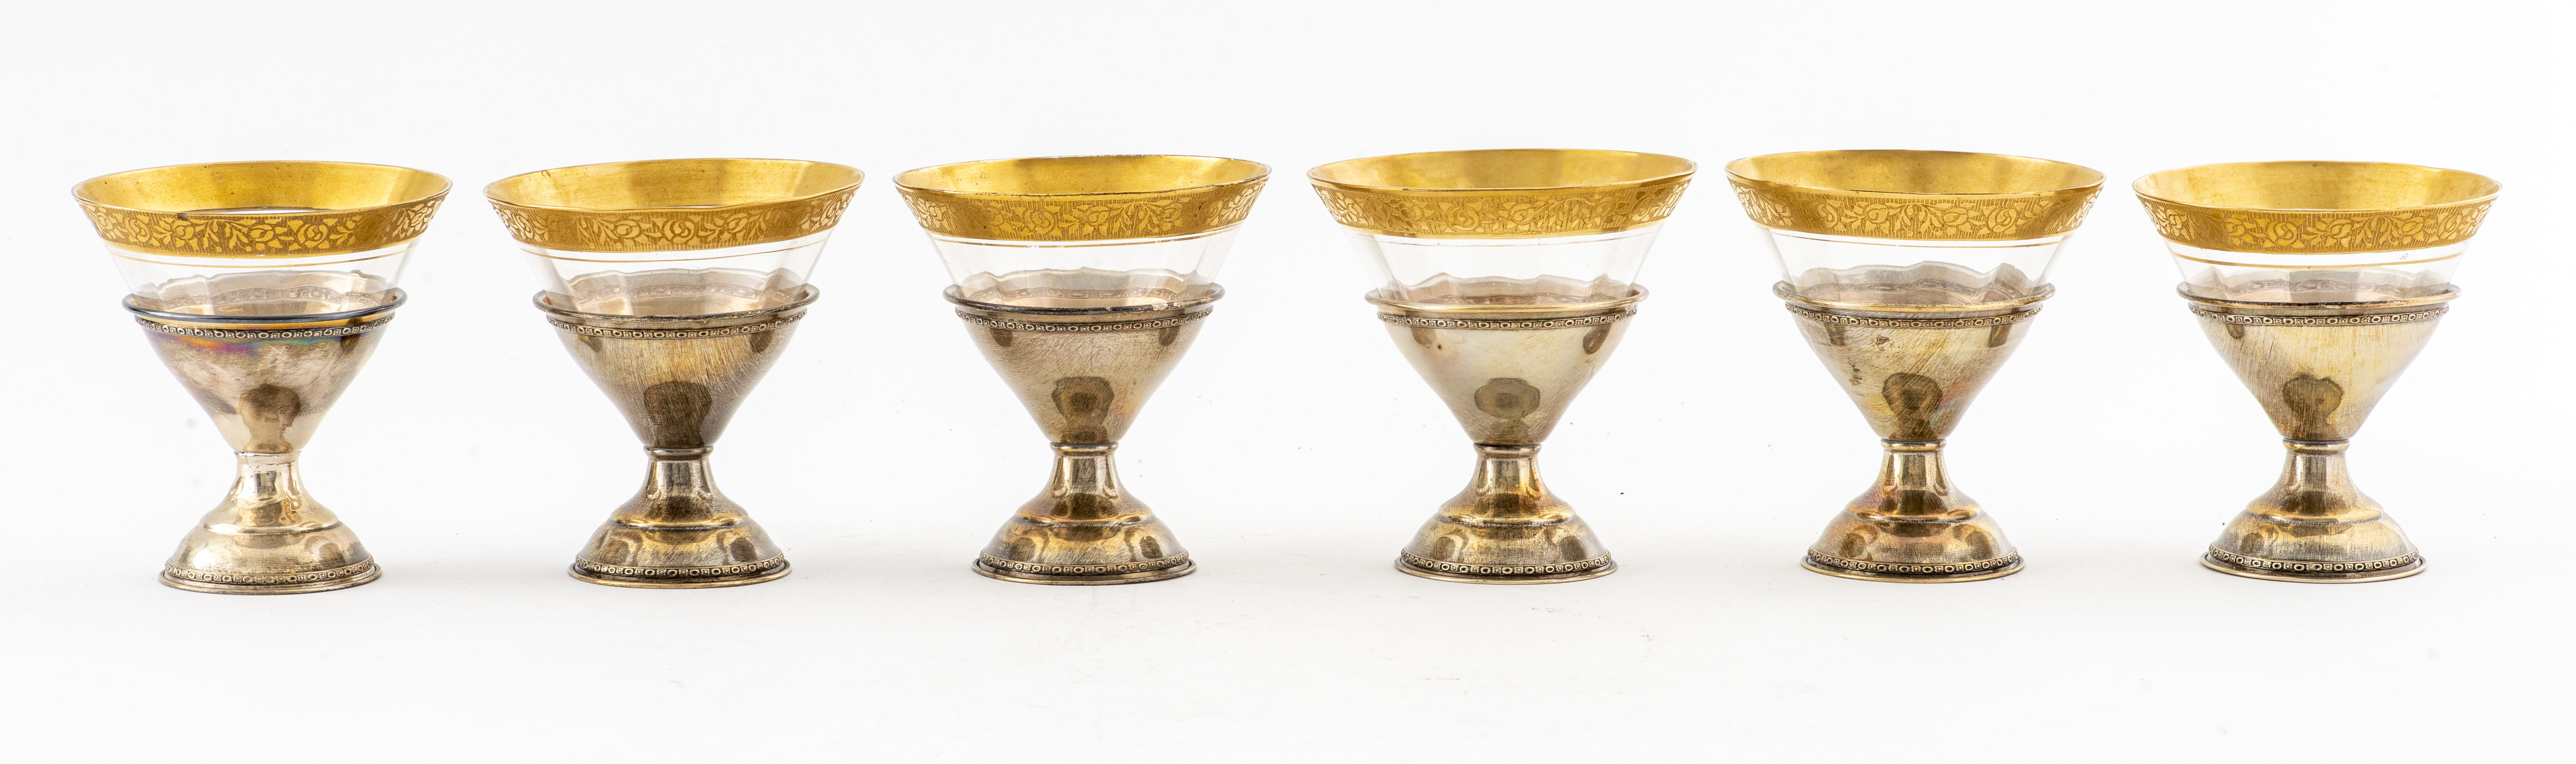 STERLING SILVER AND GILT GLASSES, 6